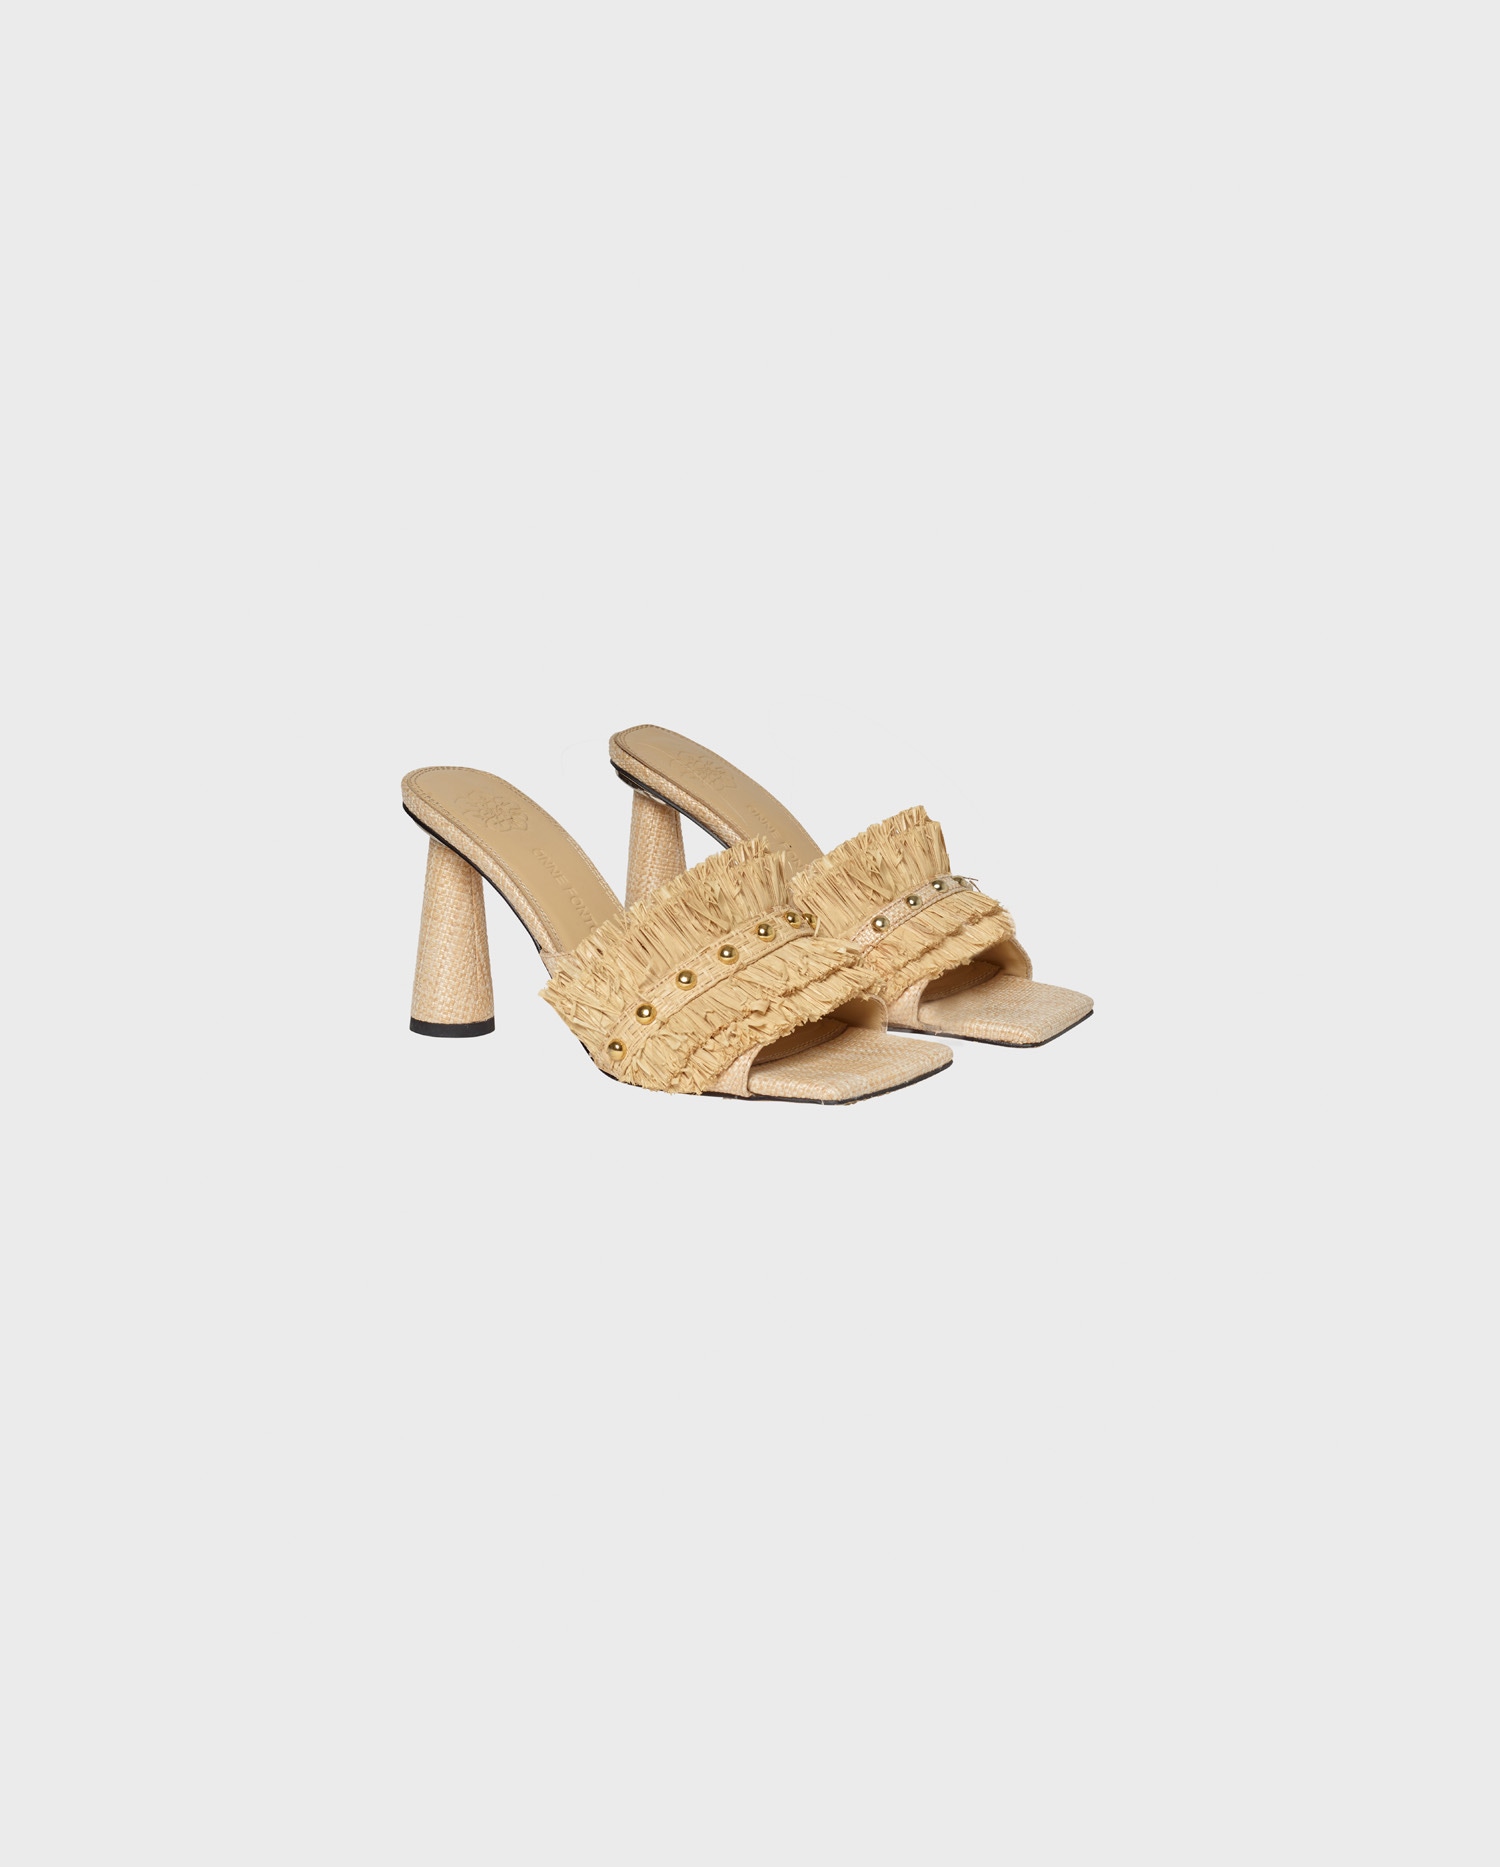 Discover the ALVAR Natural Leather Slides With Raffia Ruffle Details from ANNE FONTAINE